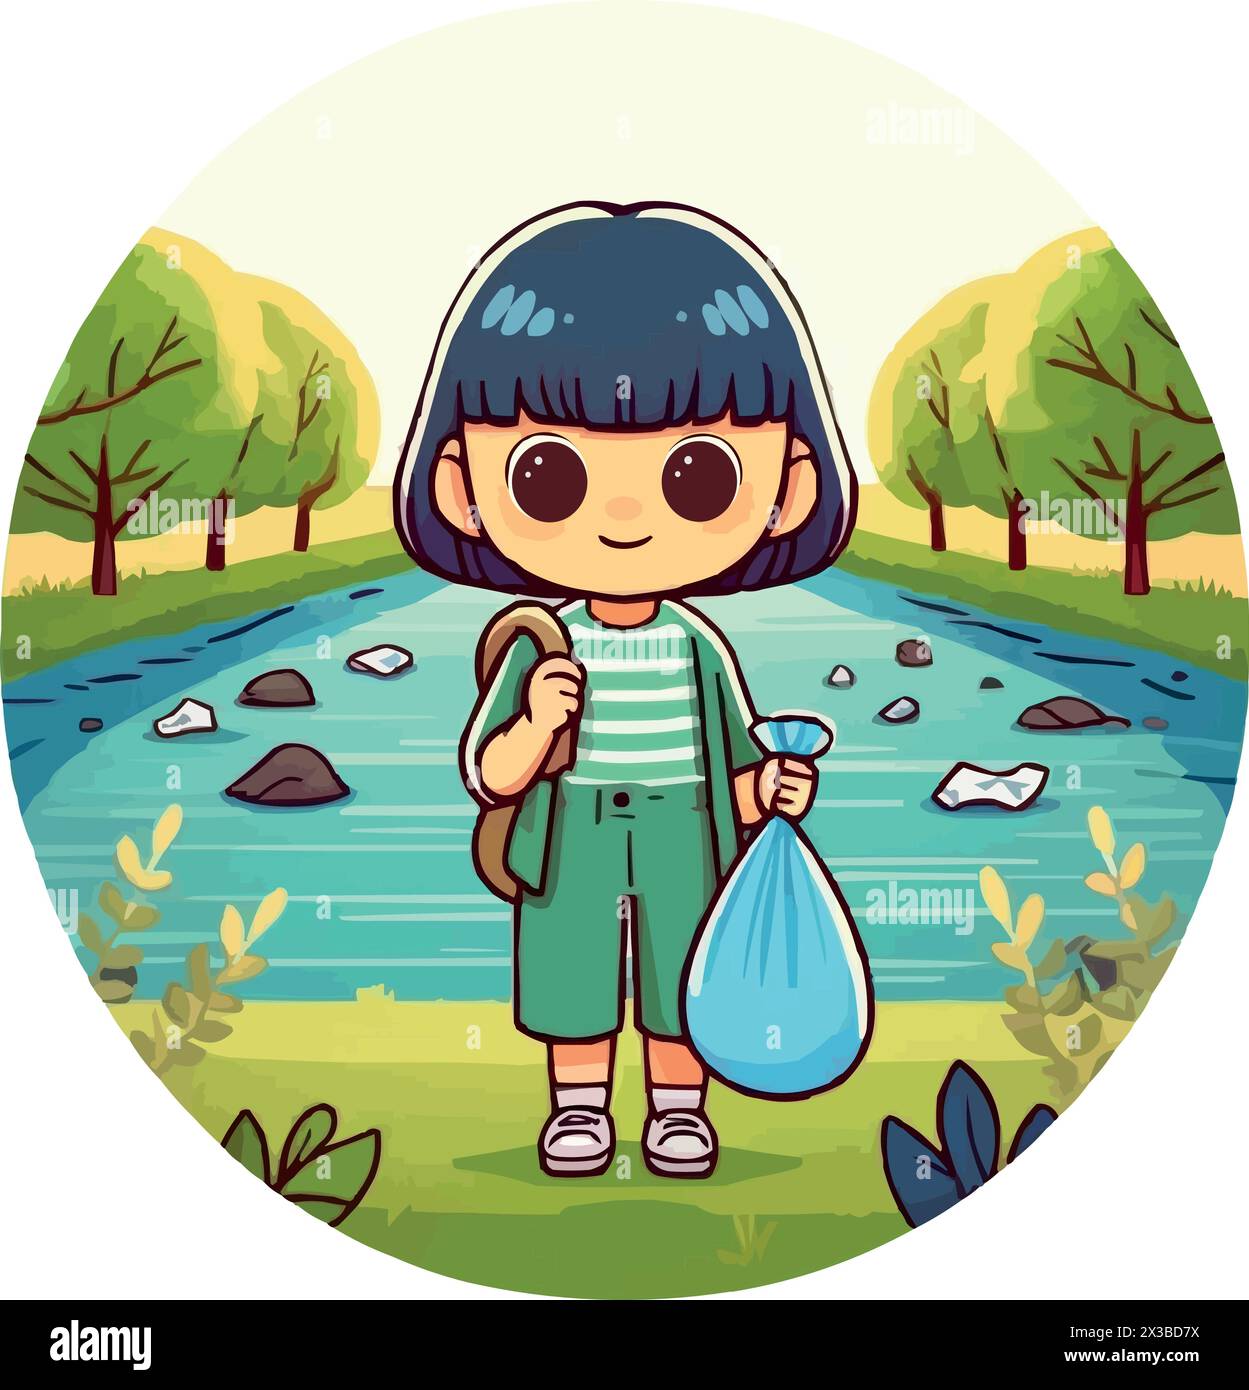 With a bag of trash in her hands, a cartoonish schoolgirl shows concern for the environment. Stock Vector